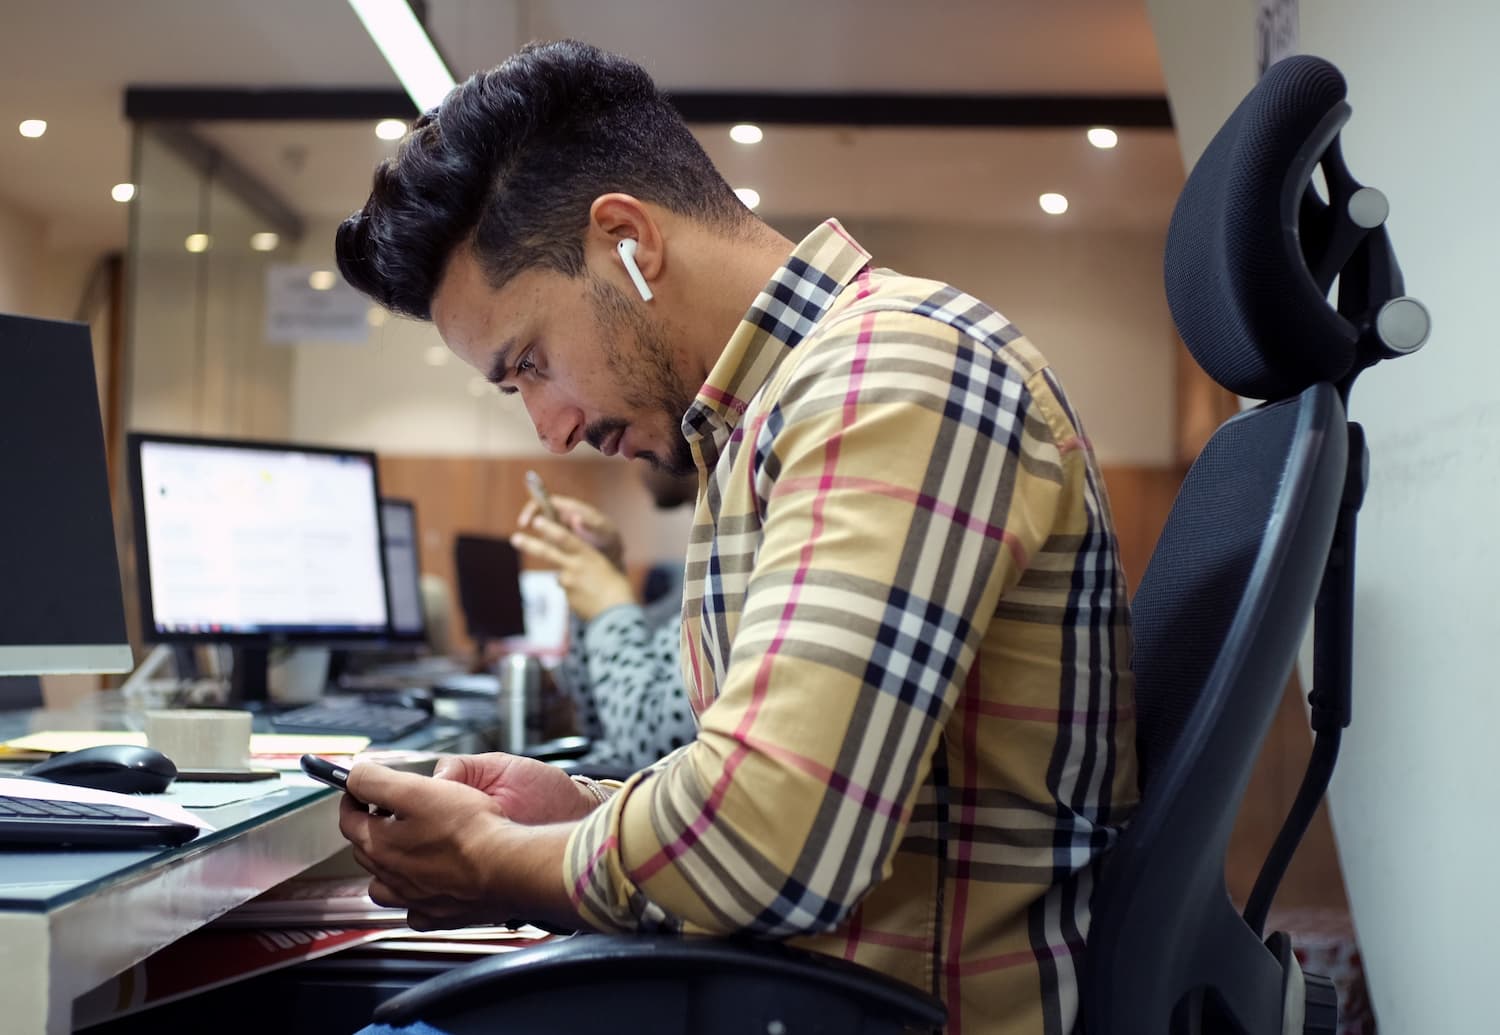  Employee wearing headphones looks at his phone while sitting at a desk